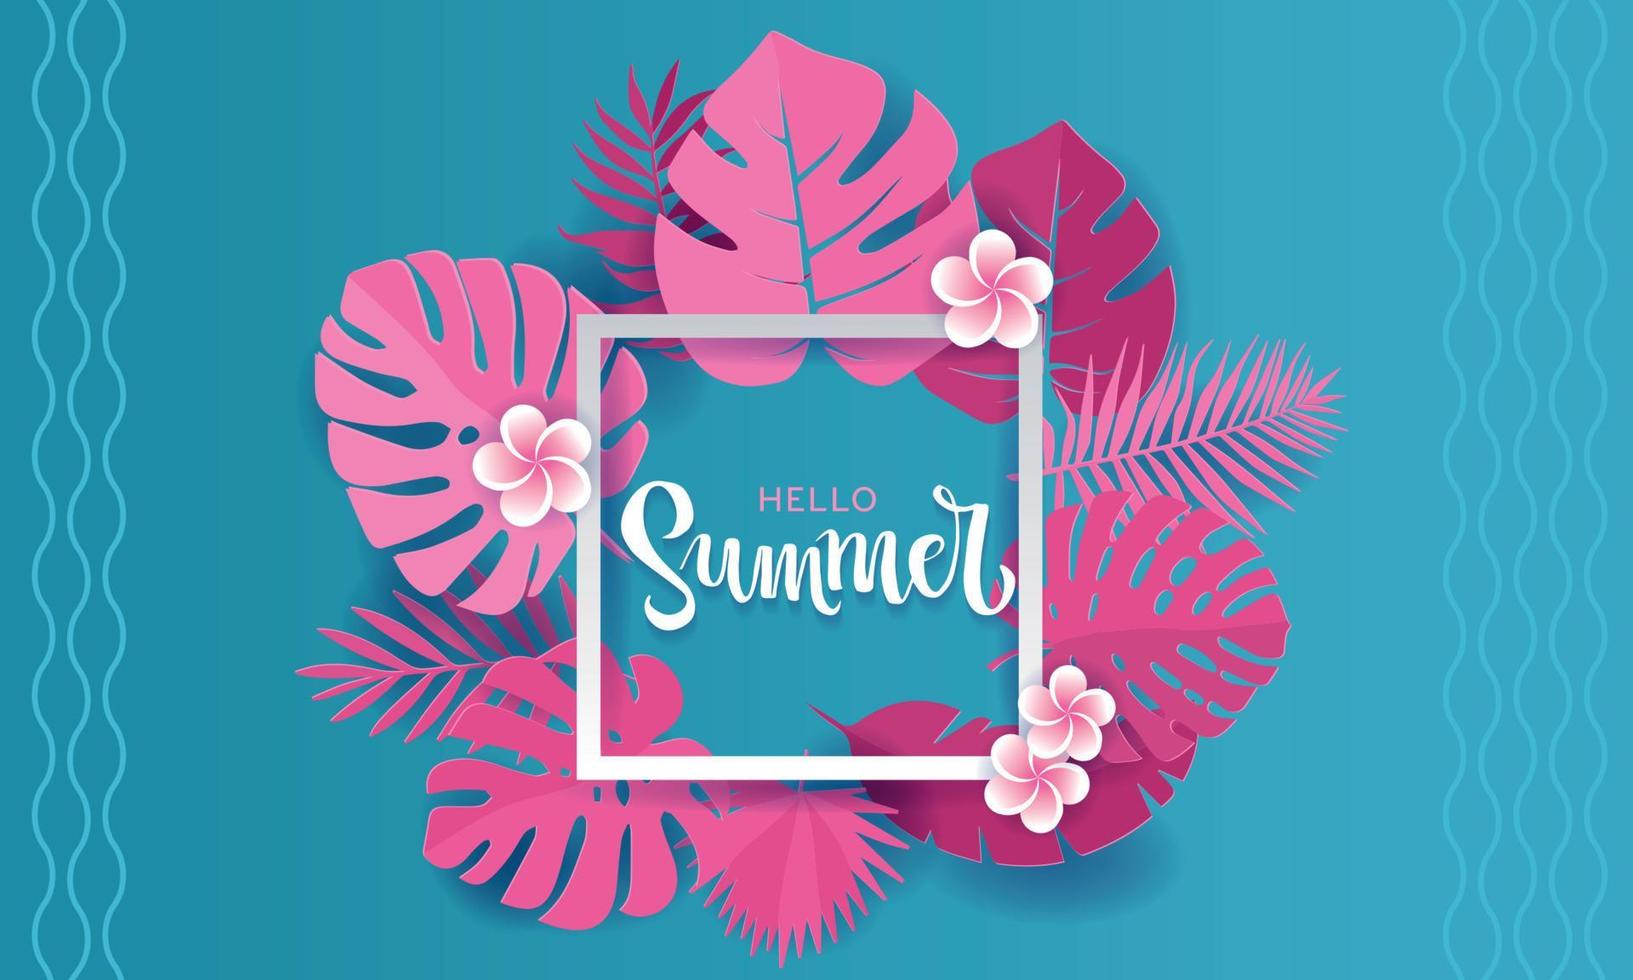 Pink monstera palm leaves aroung white square frame with hand lettering hello Summer Banner design in paper cut style. Origami plants with frangipani flowers. Summertime jungle floral background. vector